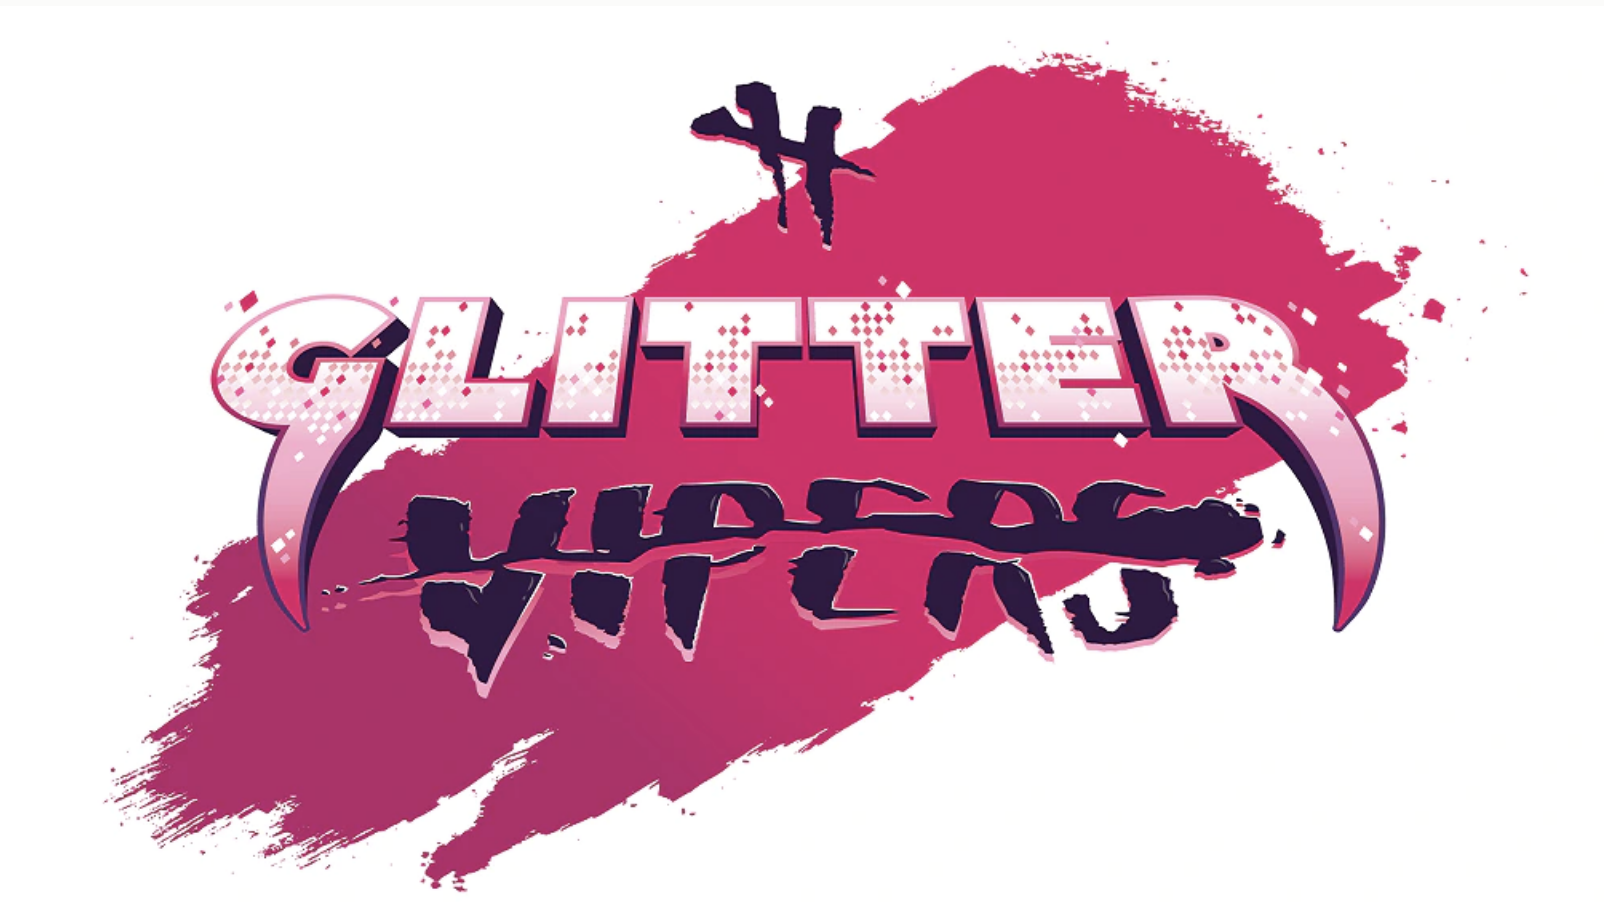 Glitter Vipers: A Queer Grindhouse Graphic Novel